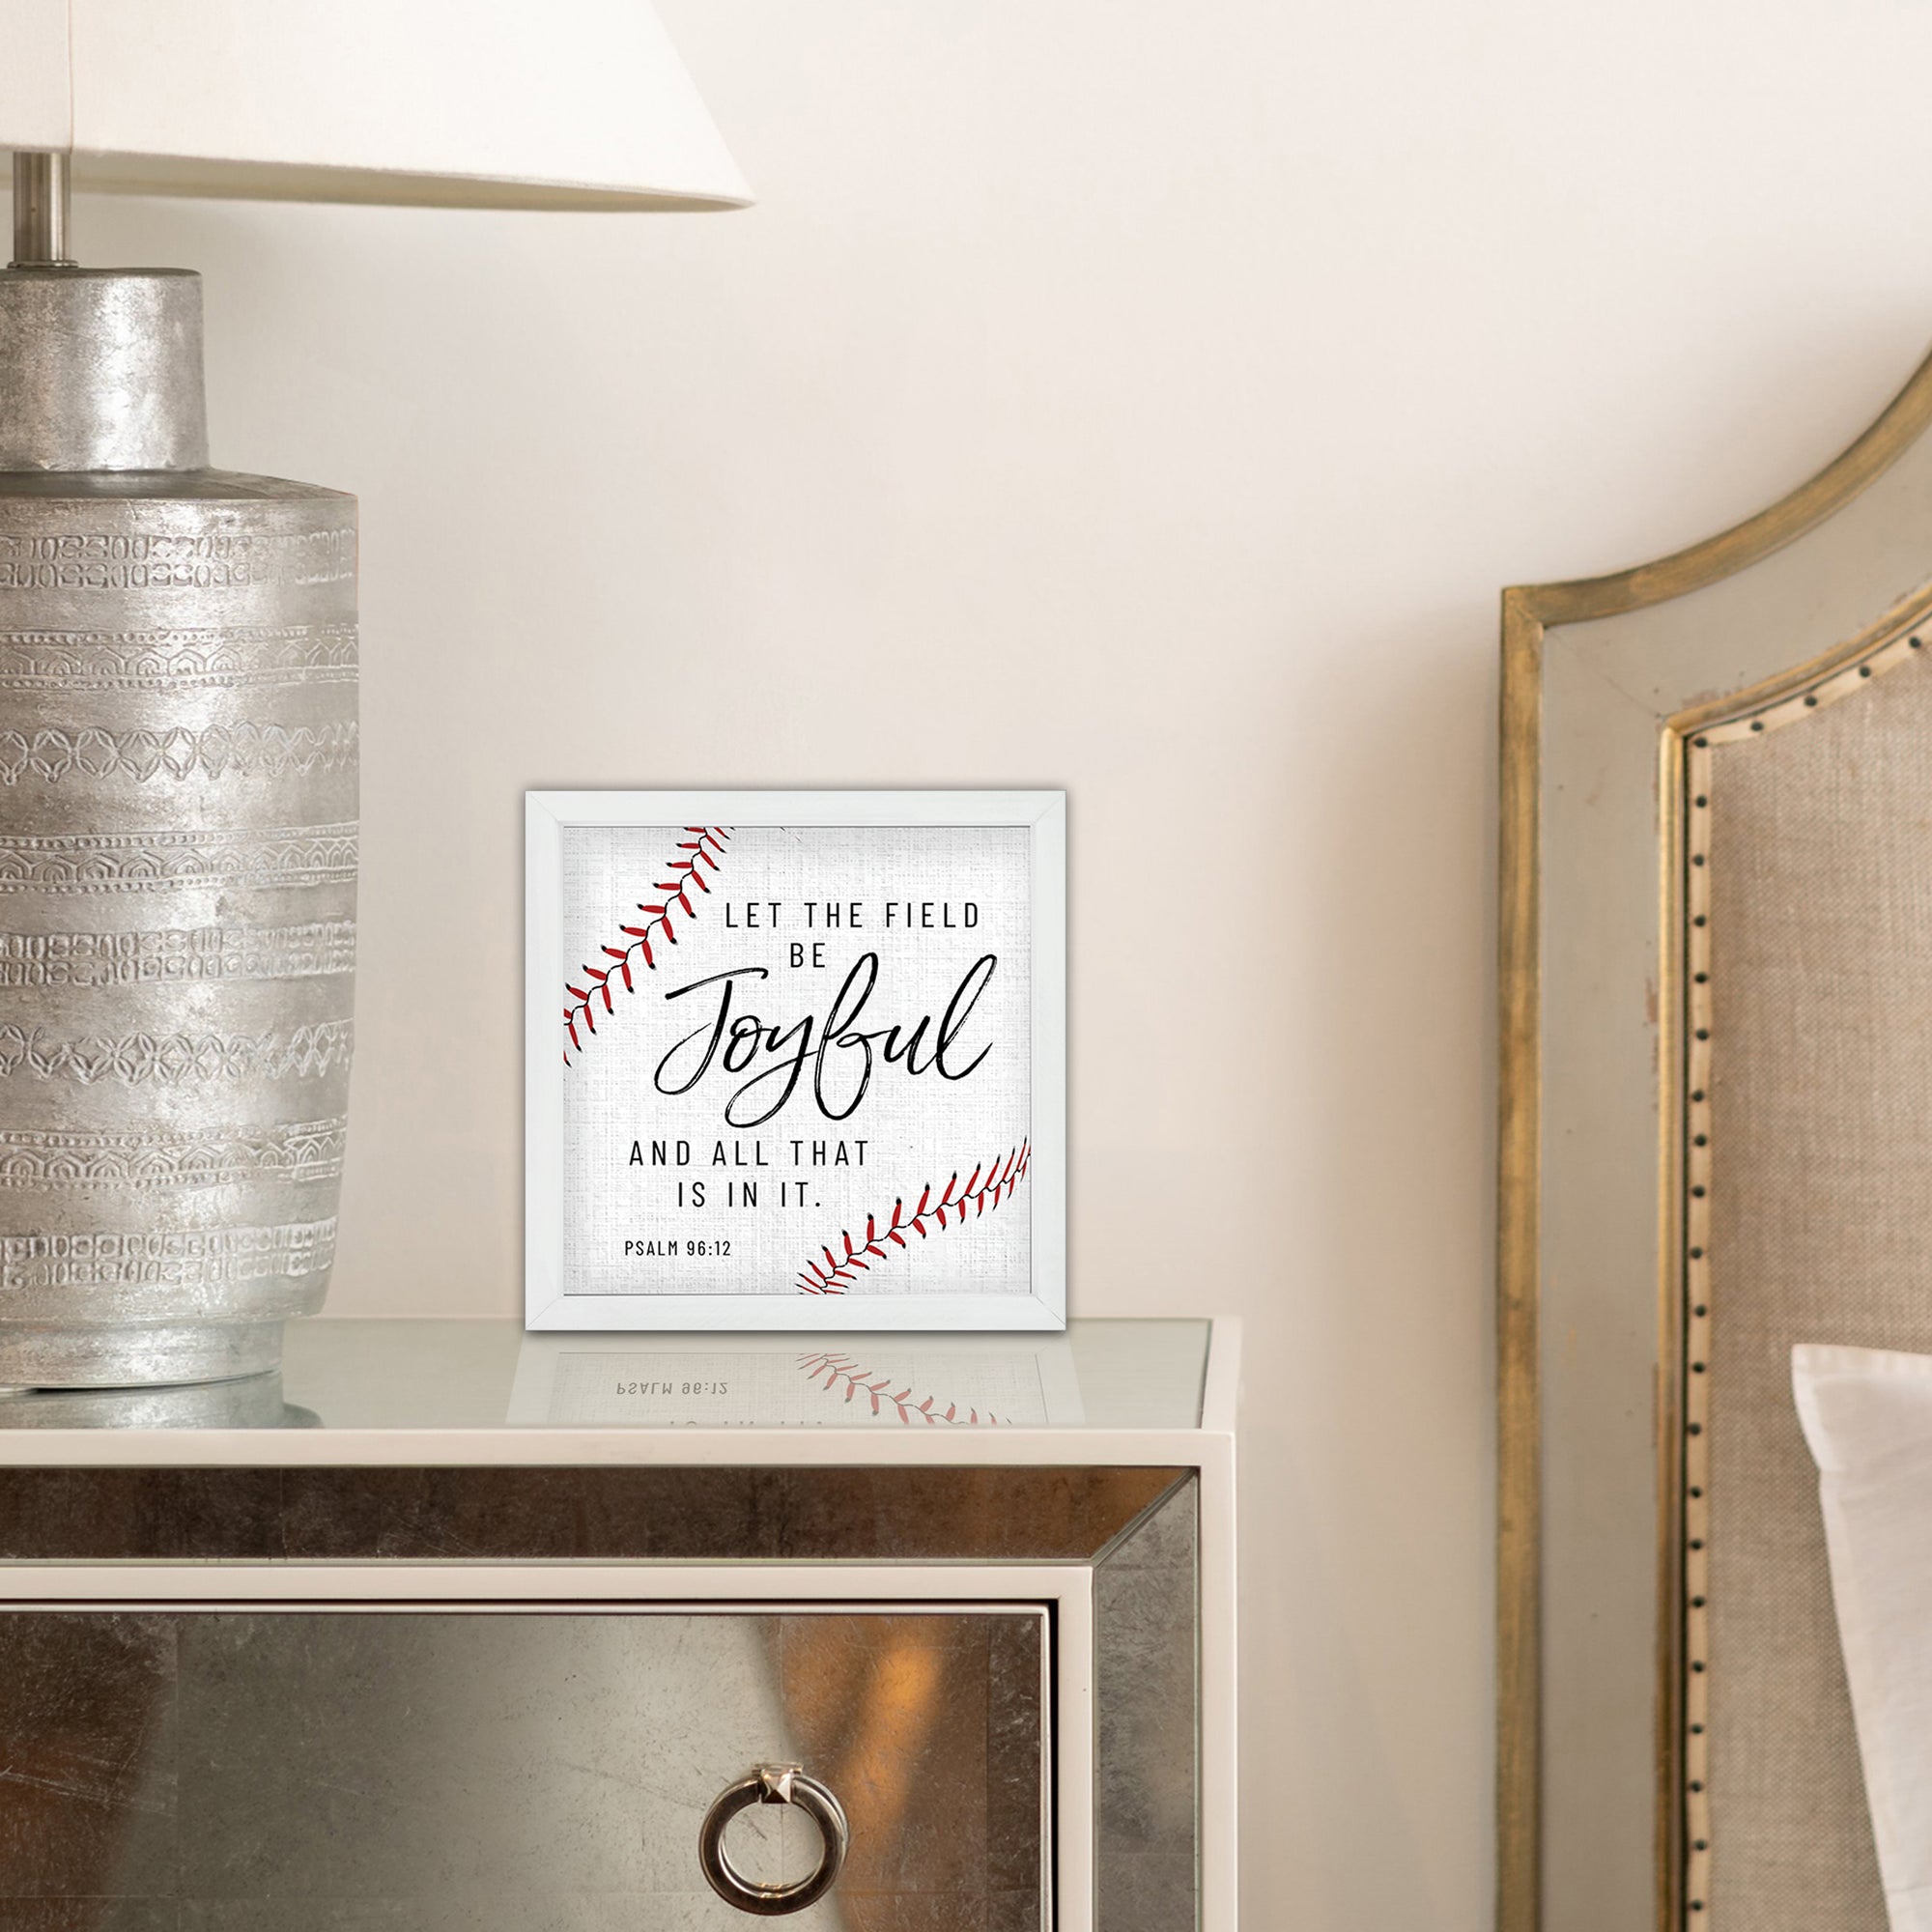 Rustic Wooden Baseball Framed Shadow Box Shelf Decor for sports enthusiasts and home decor lovers.